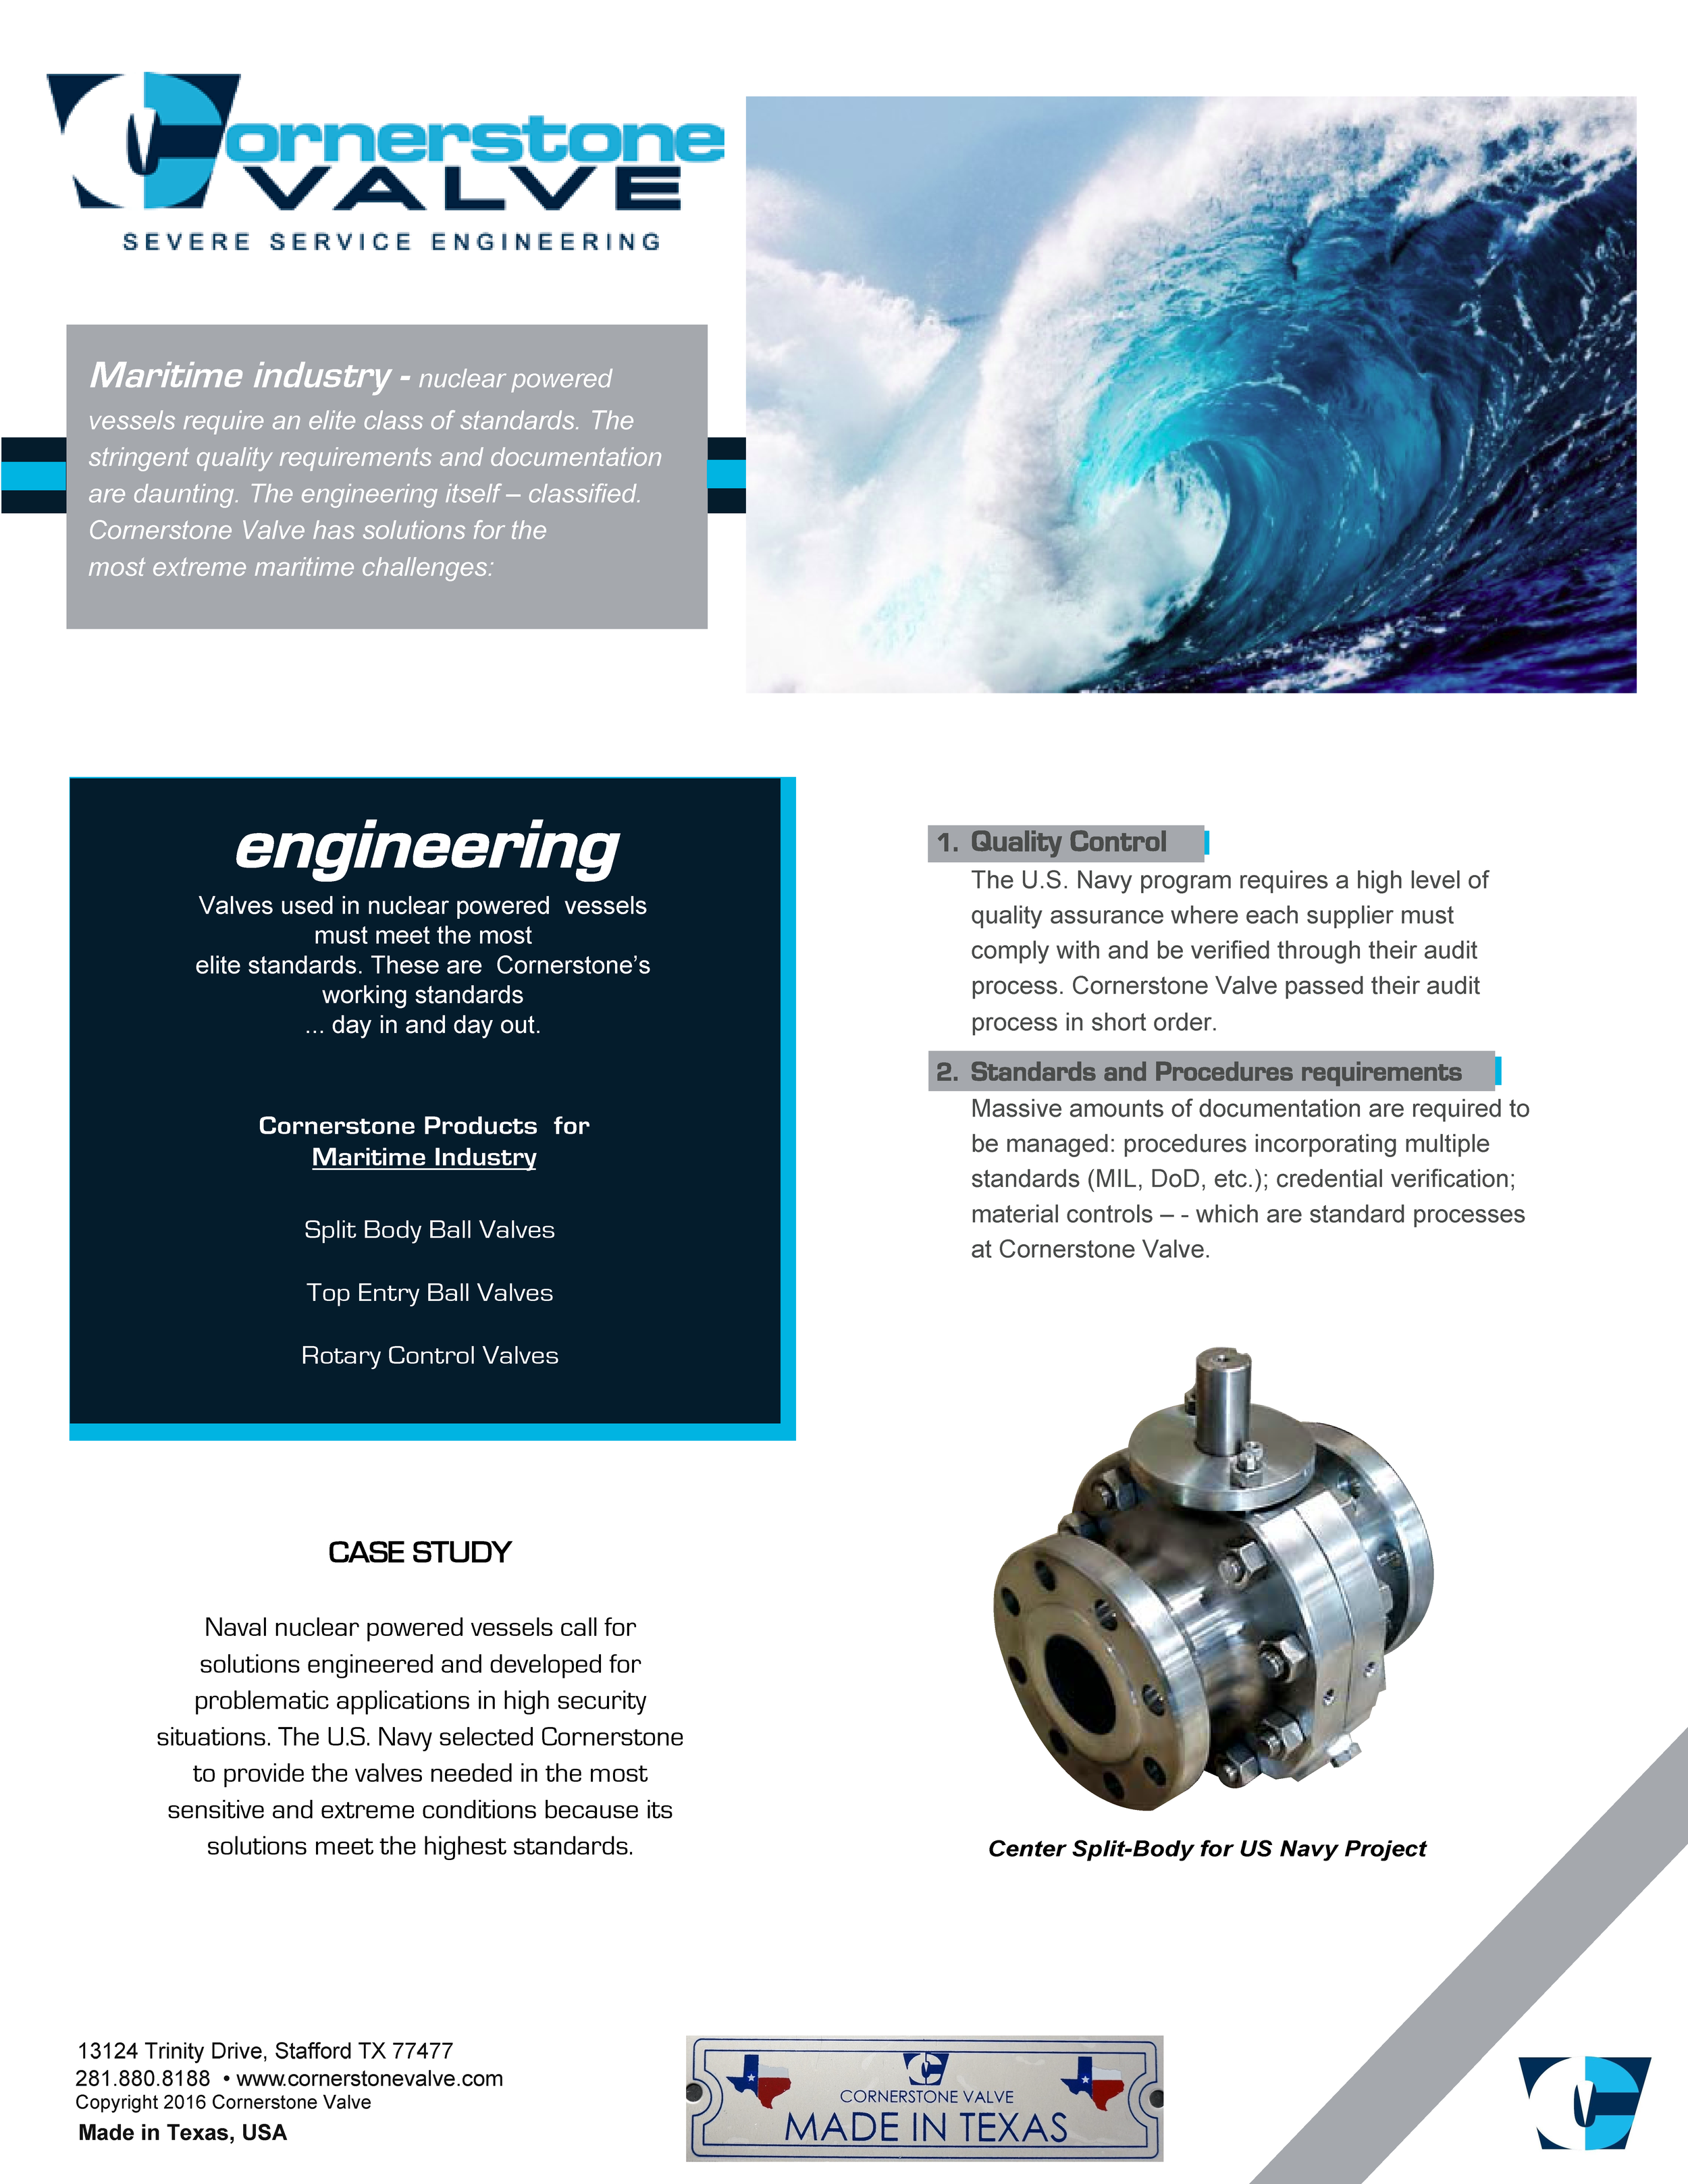  brochure design and production for maritime industries served by somya gupta. 